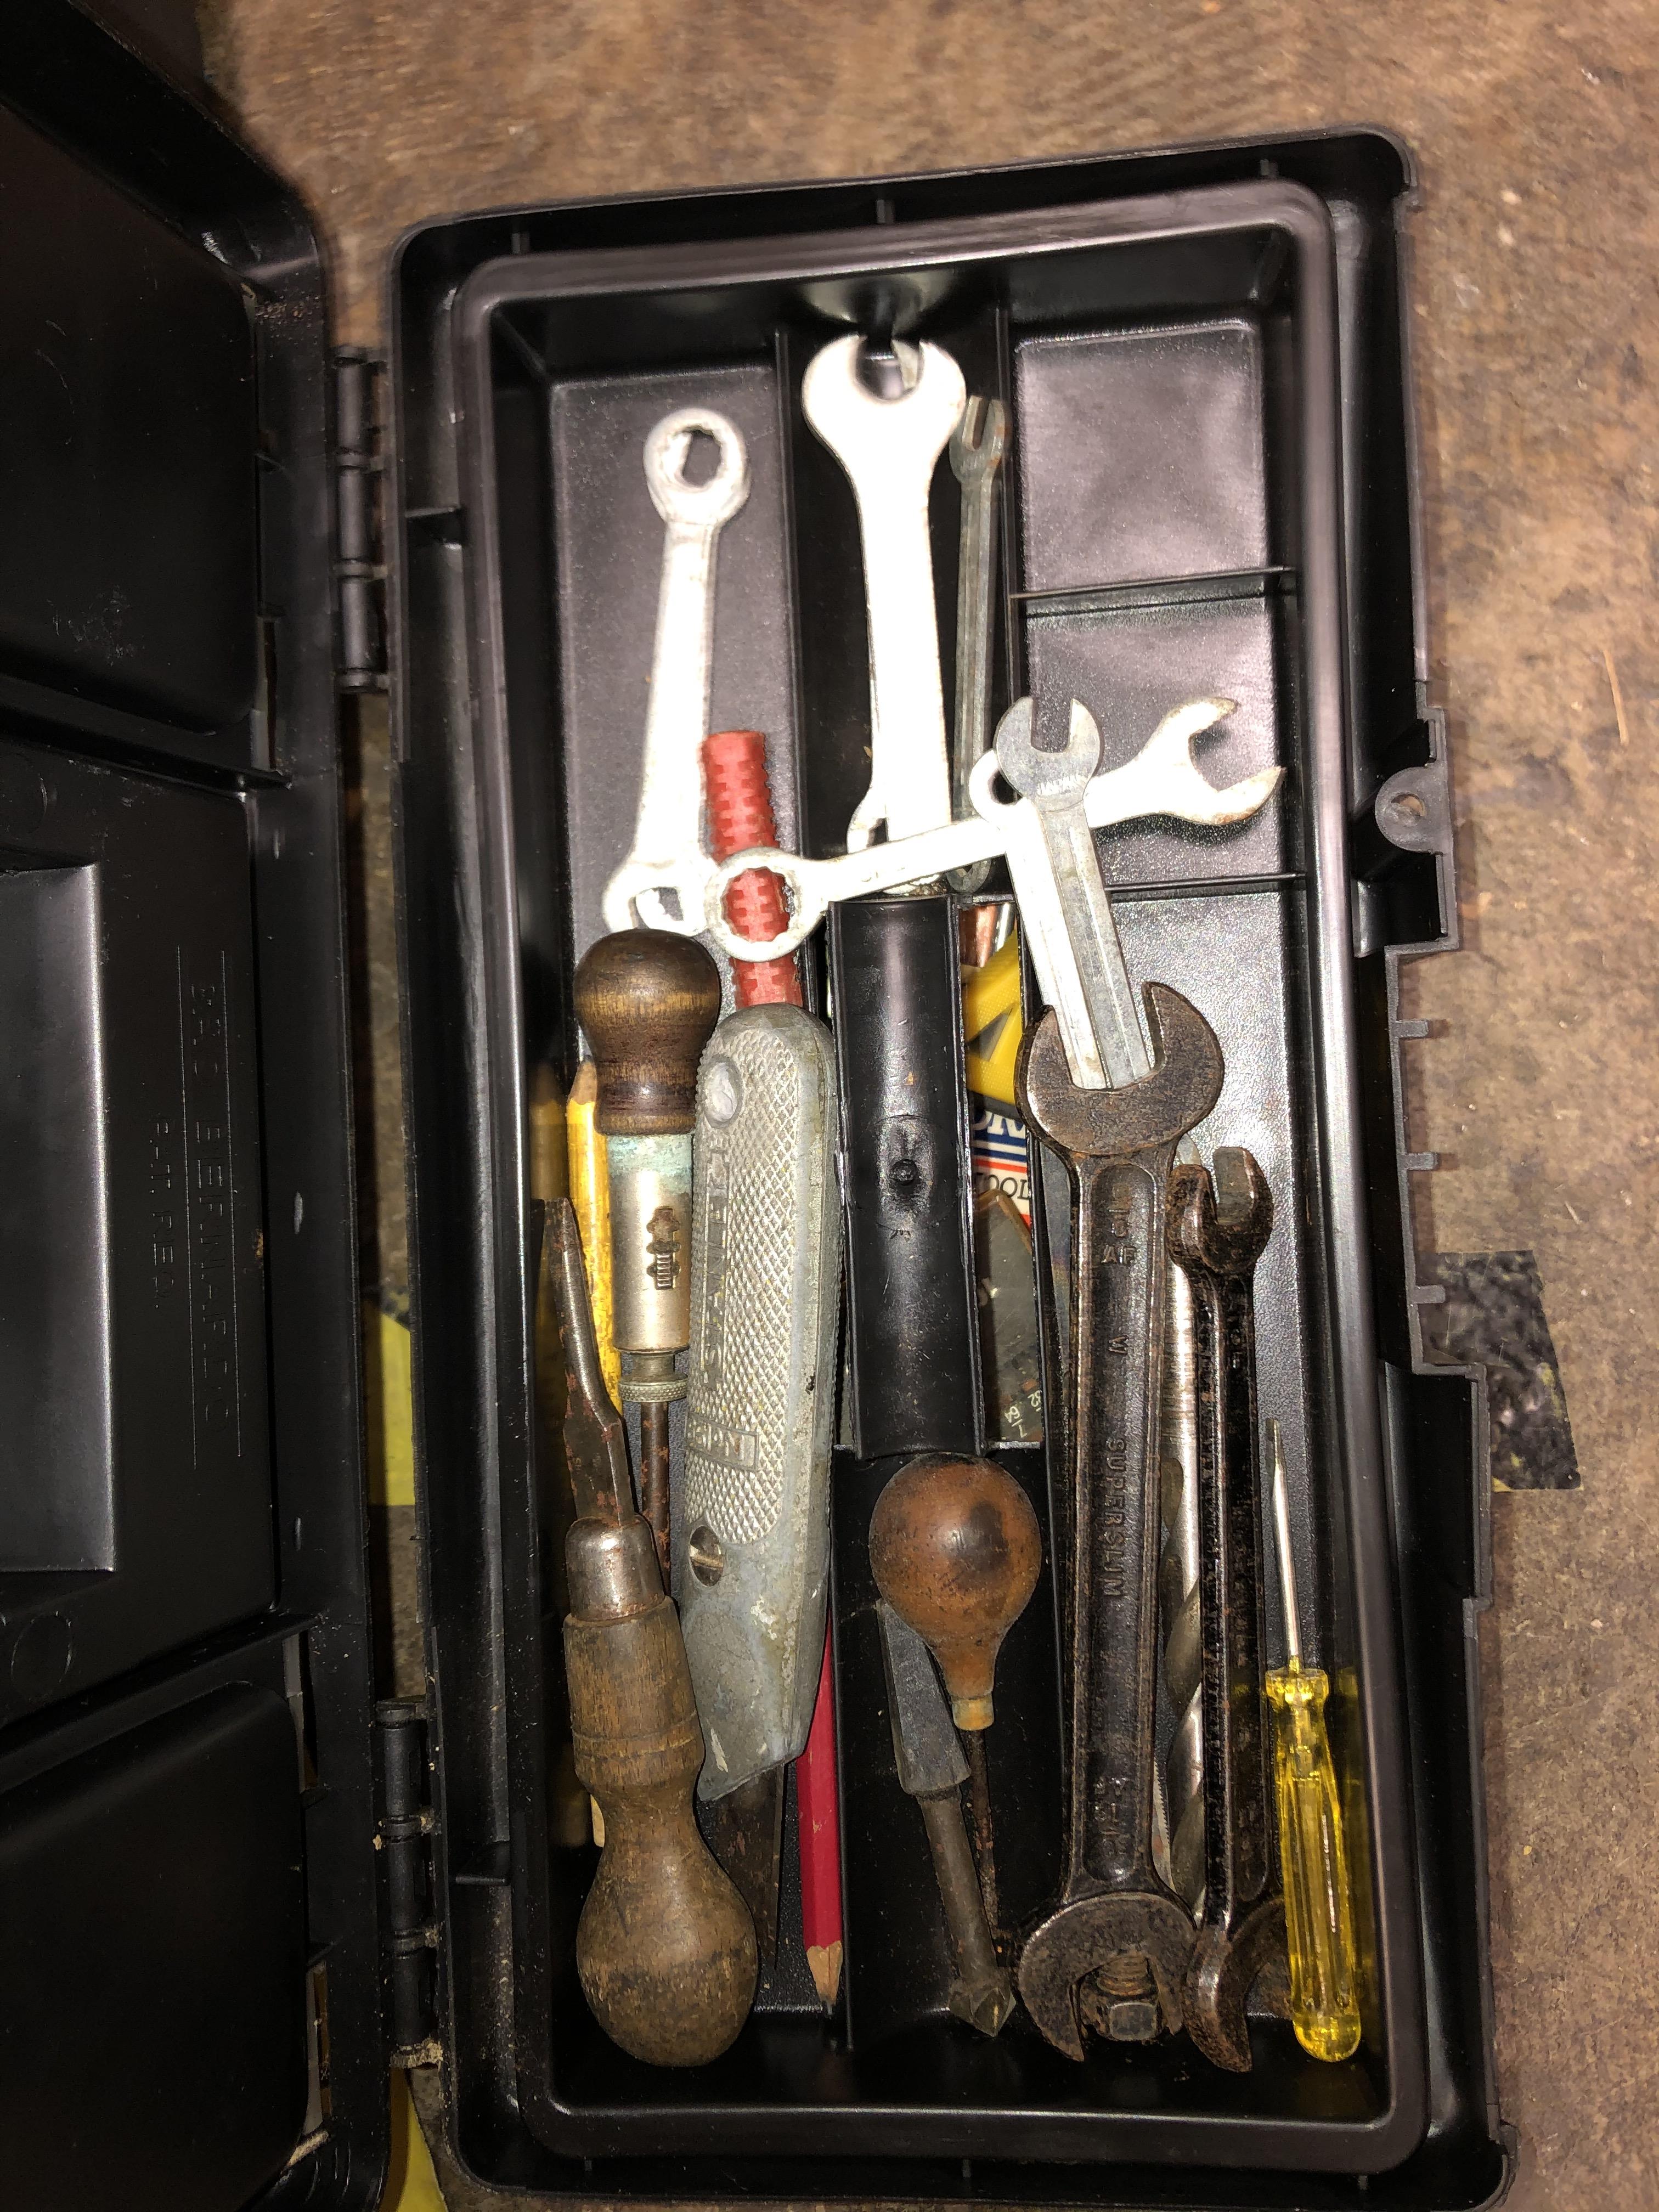 THREE TOOLBOXES AND CONTENTS, DRILL BITS, SCREWDRIVERS, - Image 4 of 4